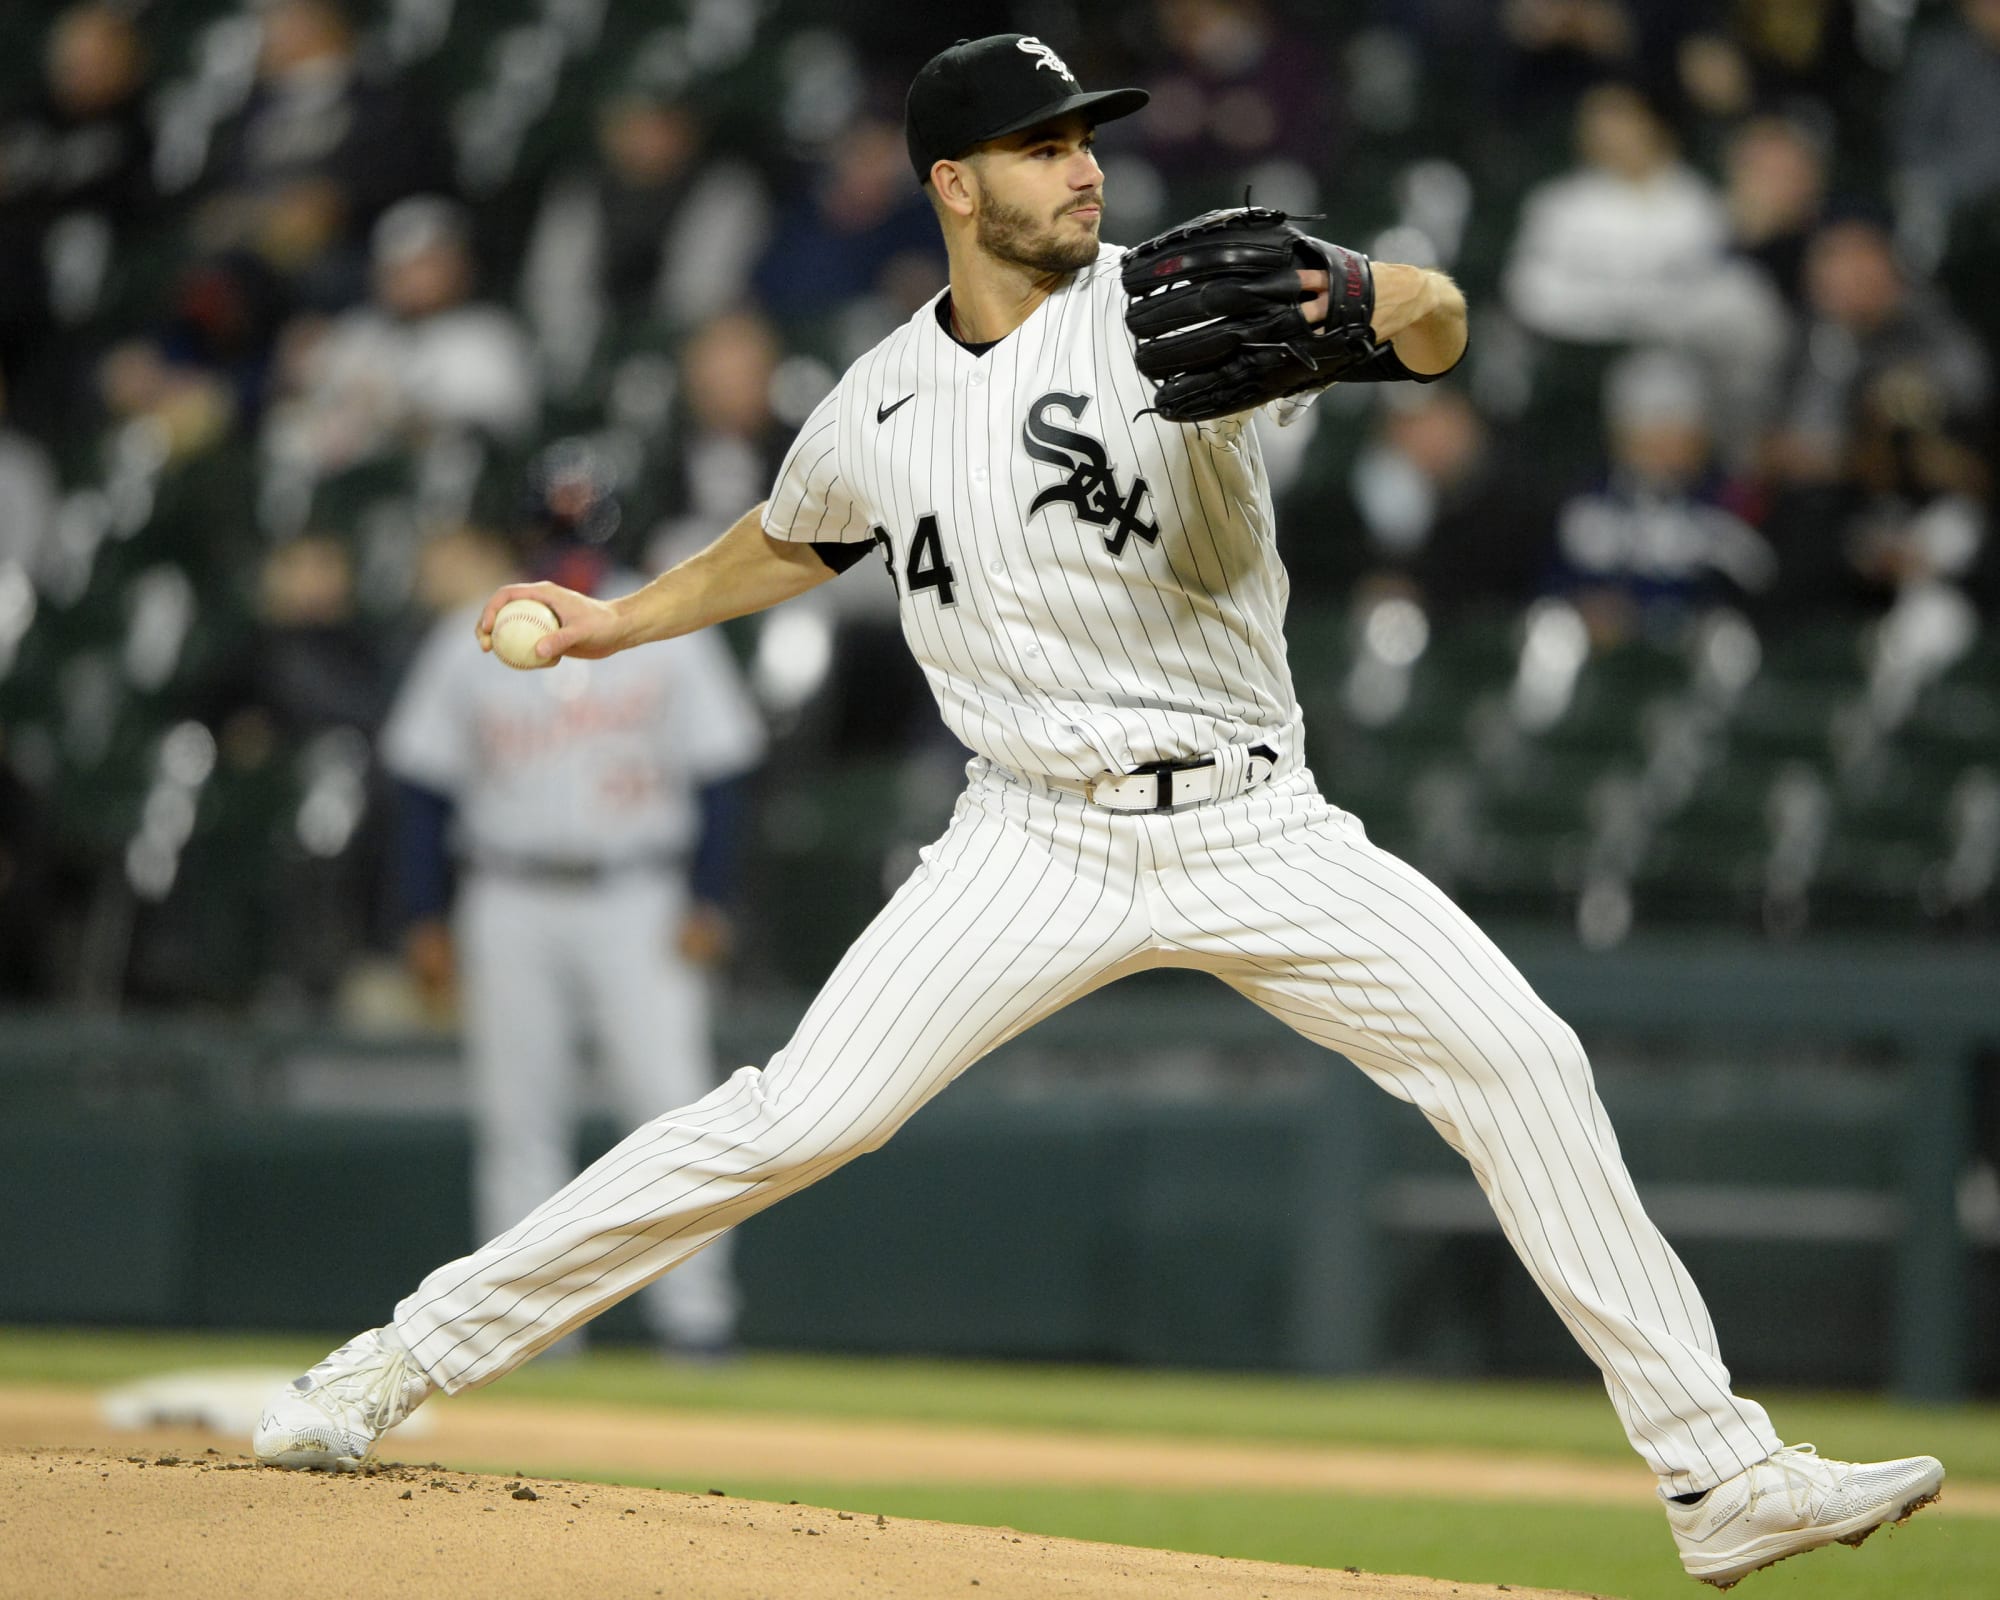 The Chicago White Sox needed this blistering Dylan Cease start